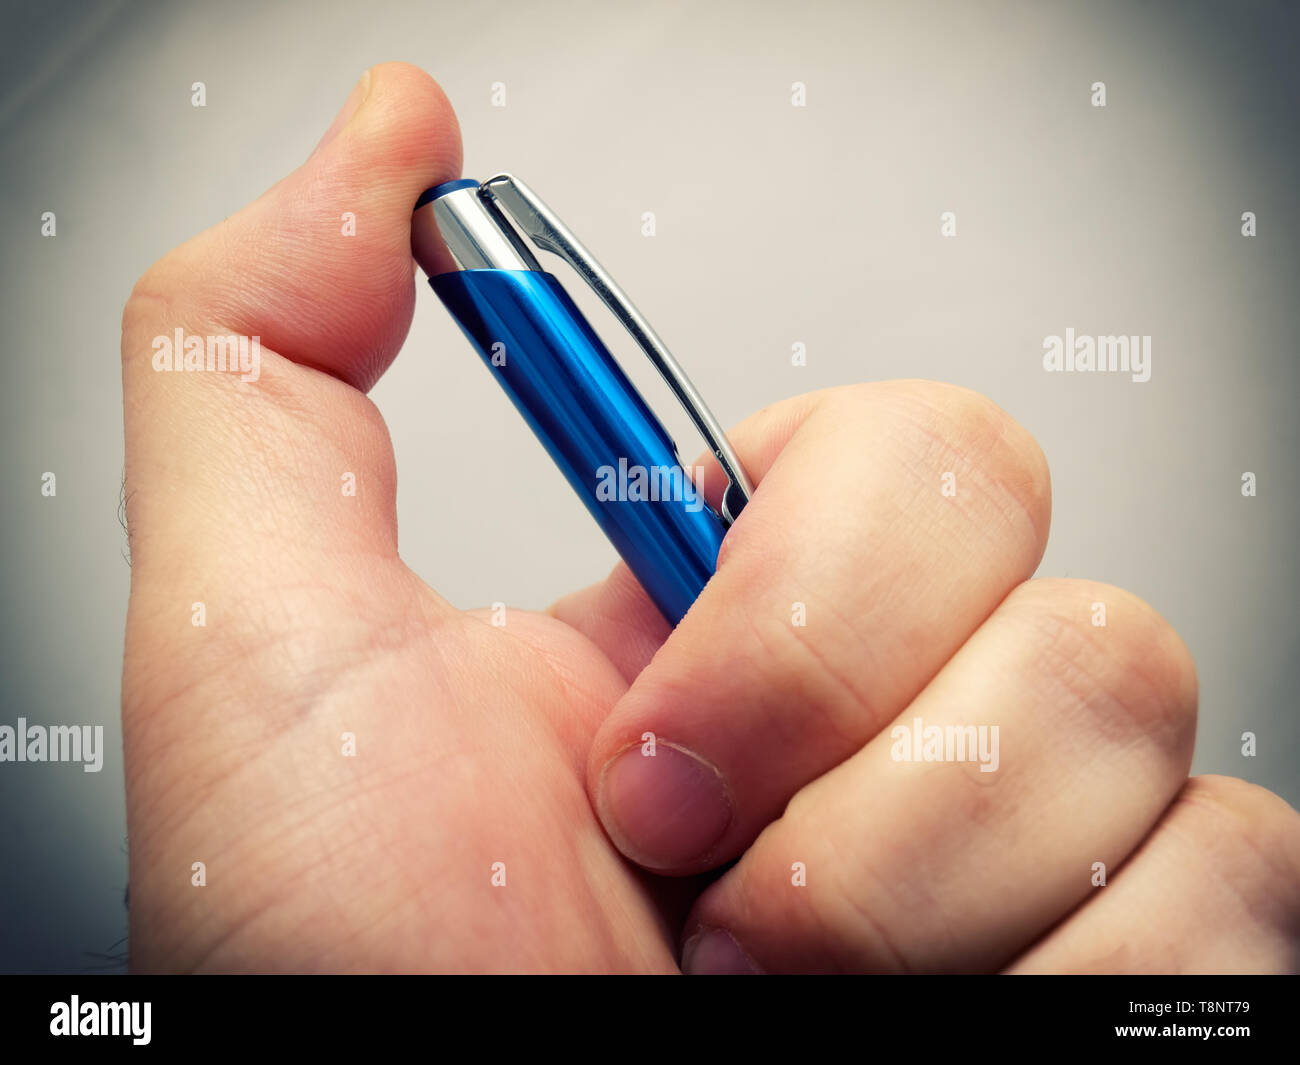 A closeup view of a hand holding a pencil. Stock Photo